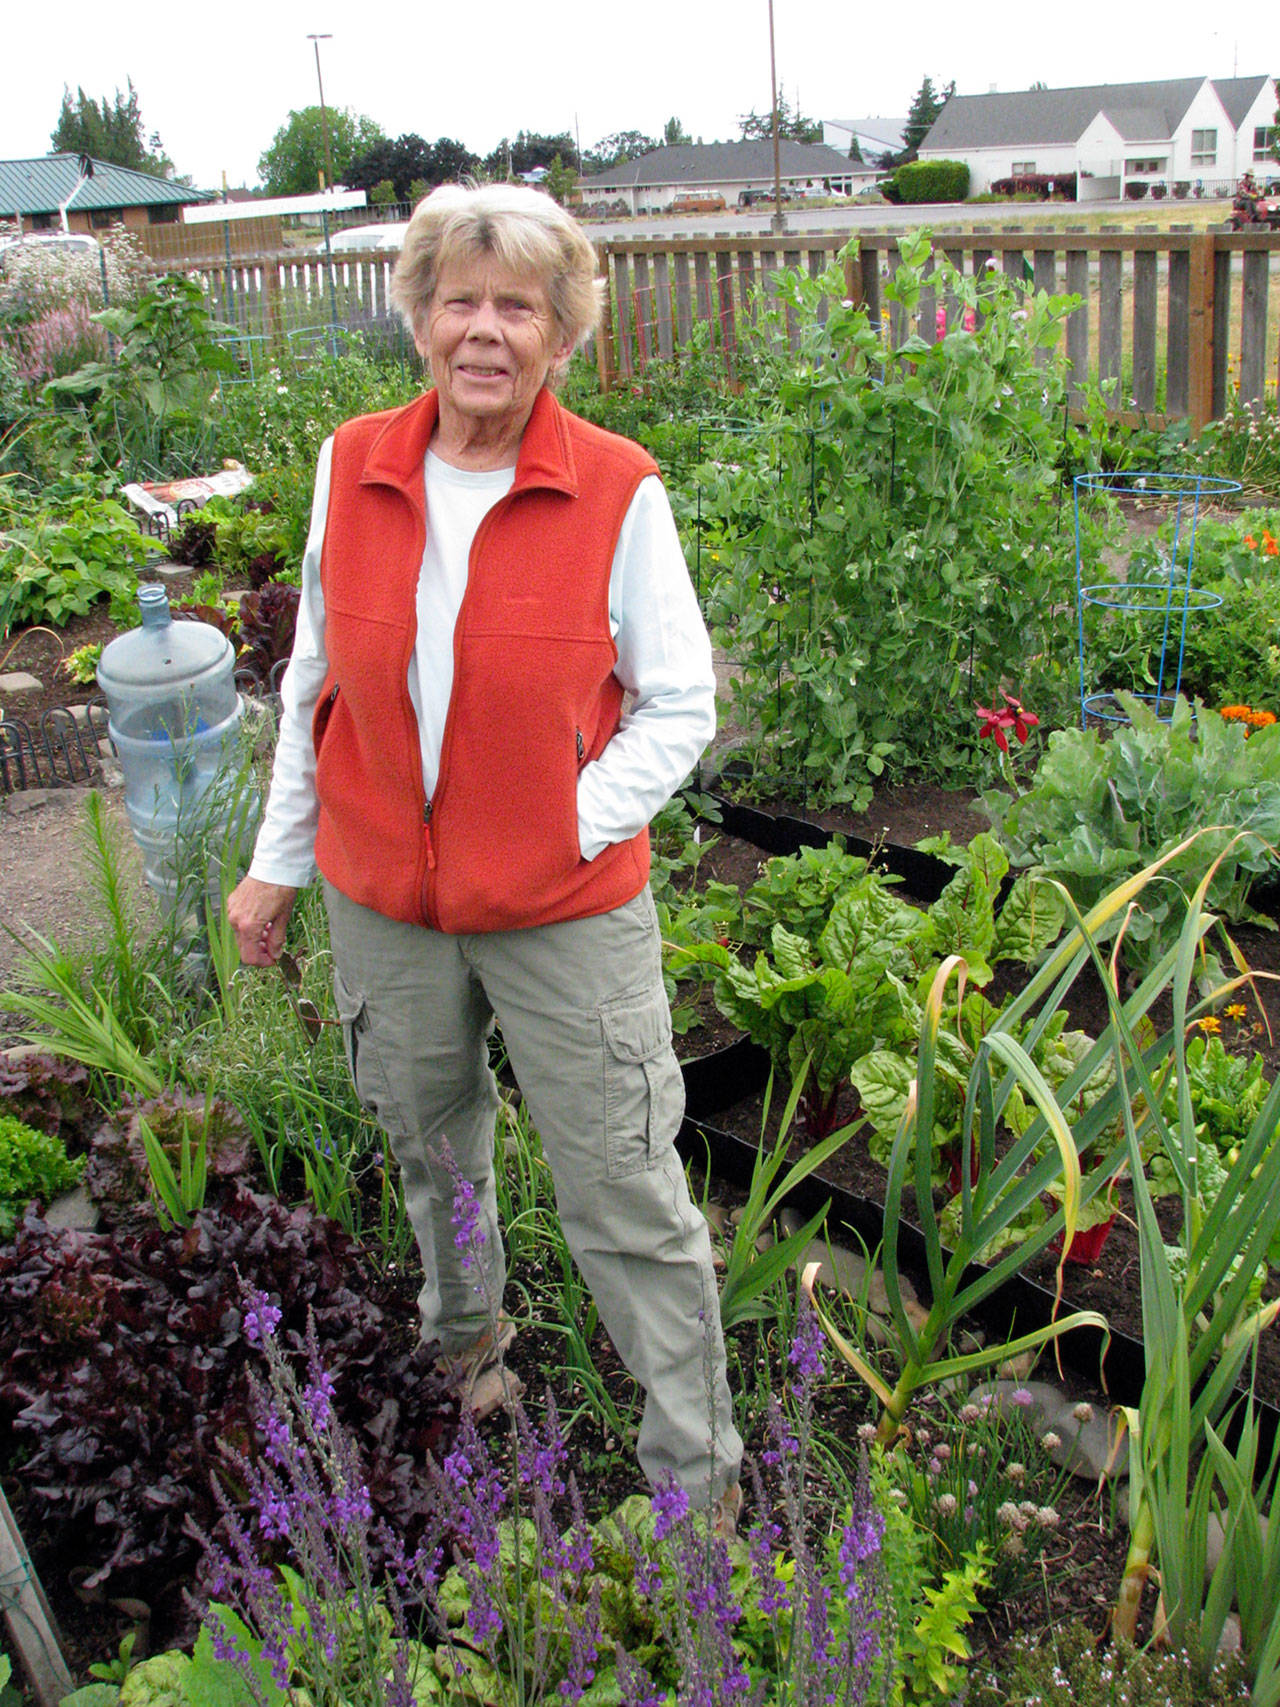 Pam Larsen will discuss growing garlic at a Green Thumb Garden Tips lecture on Thursday, Aug. 13.